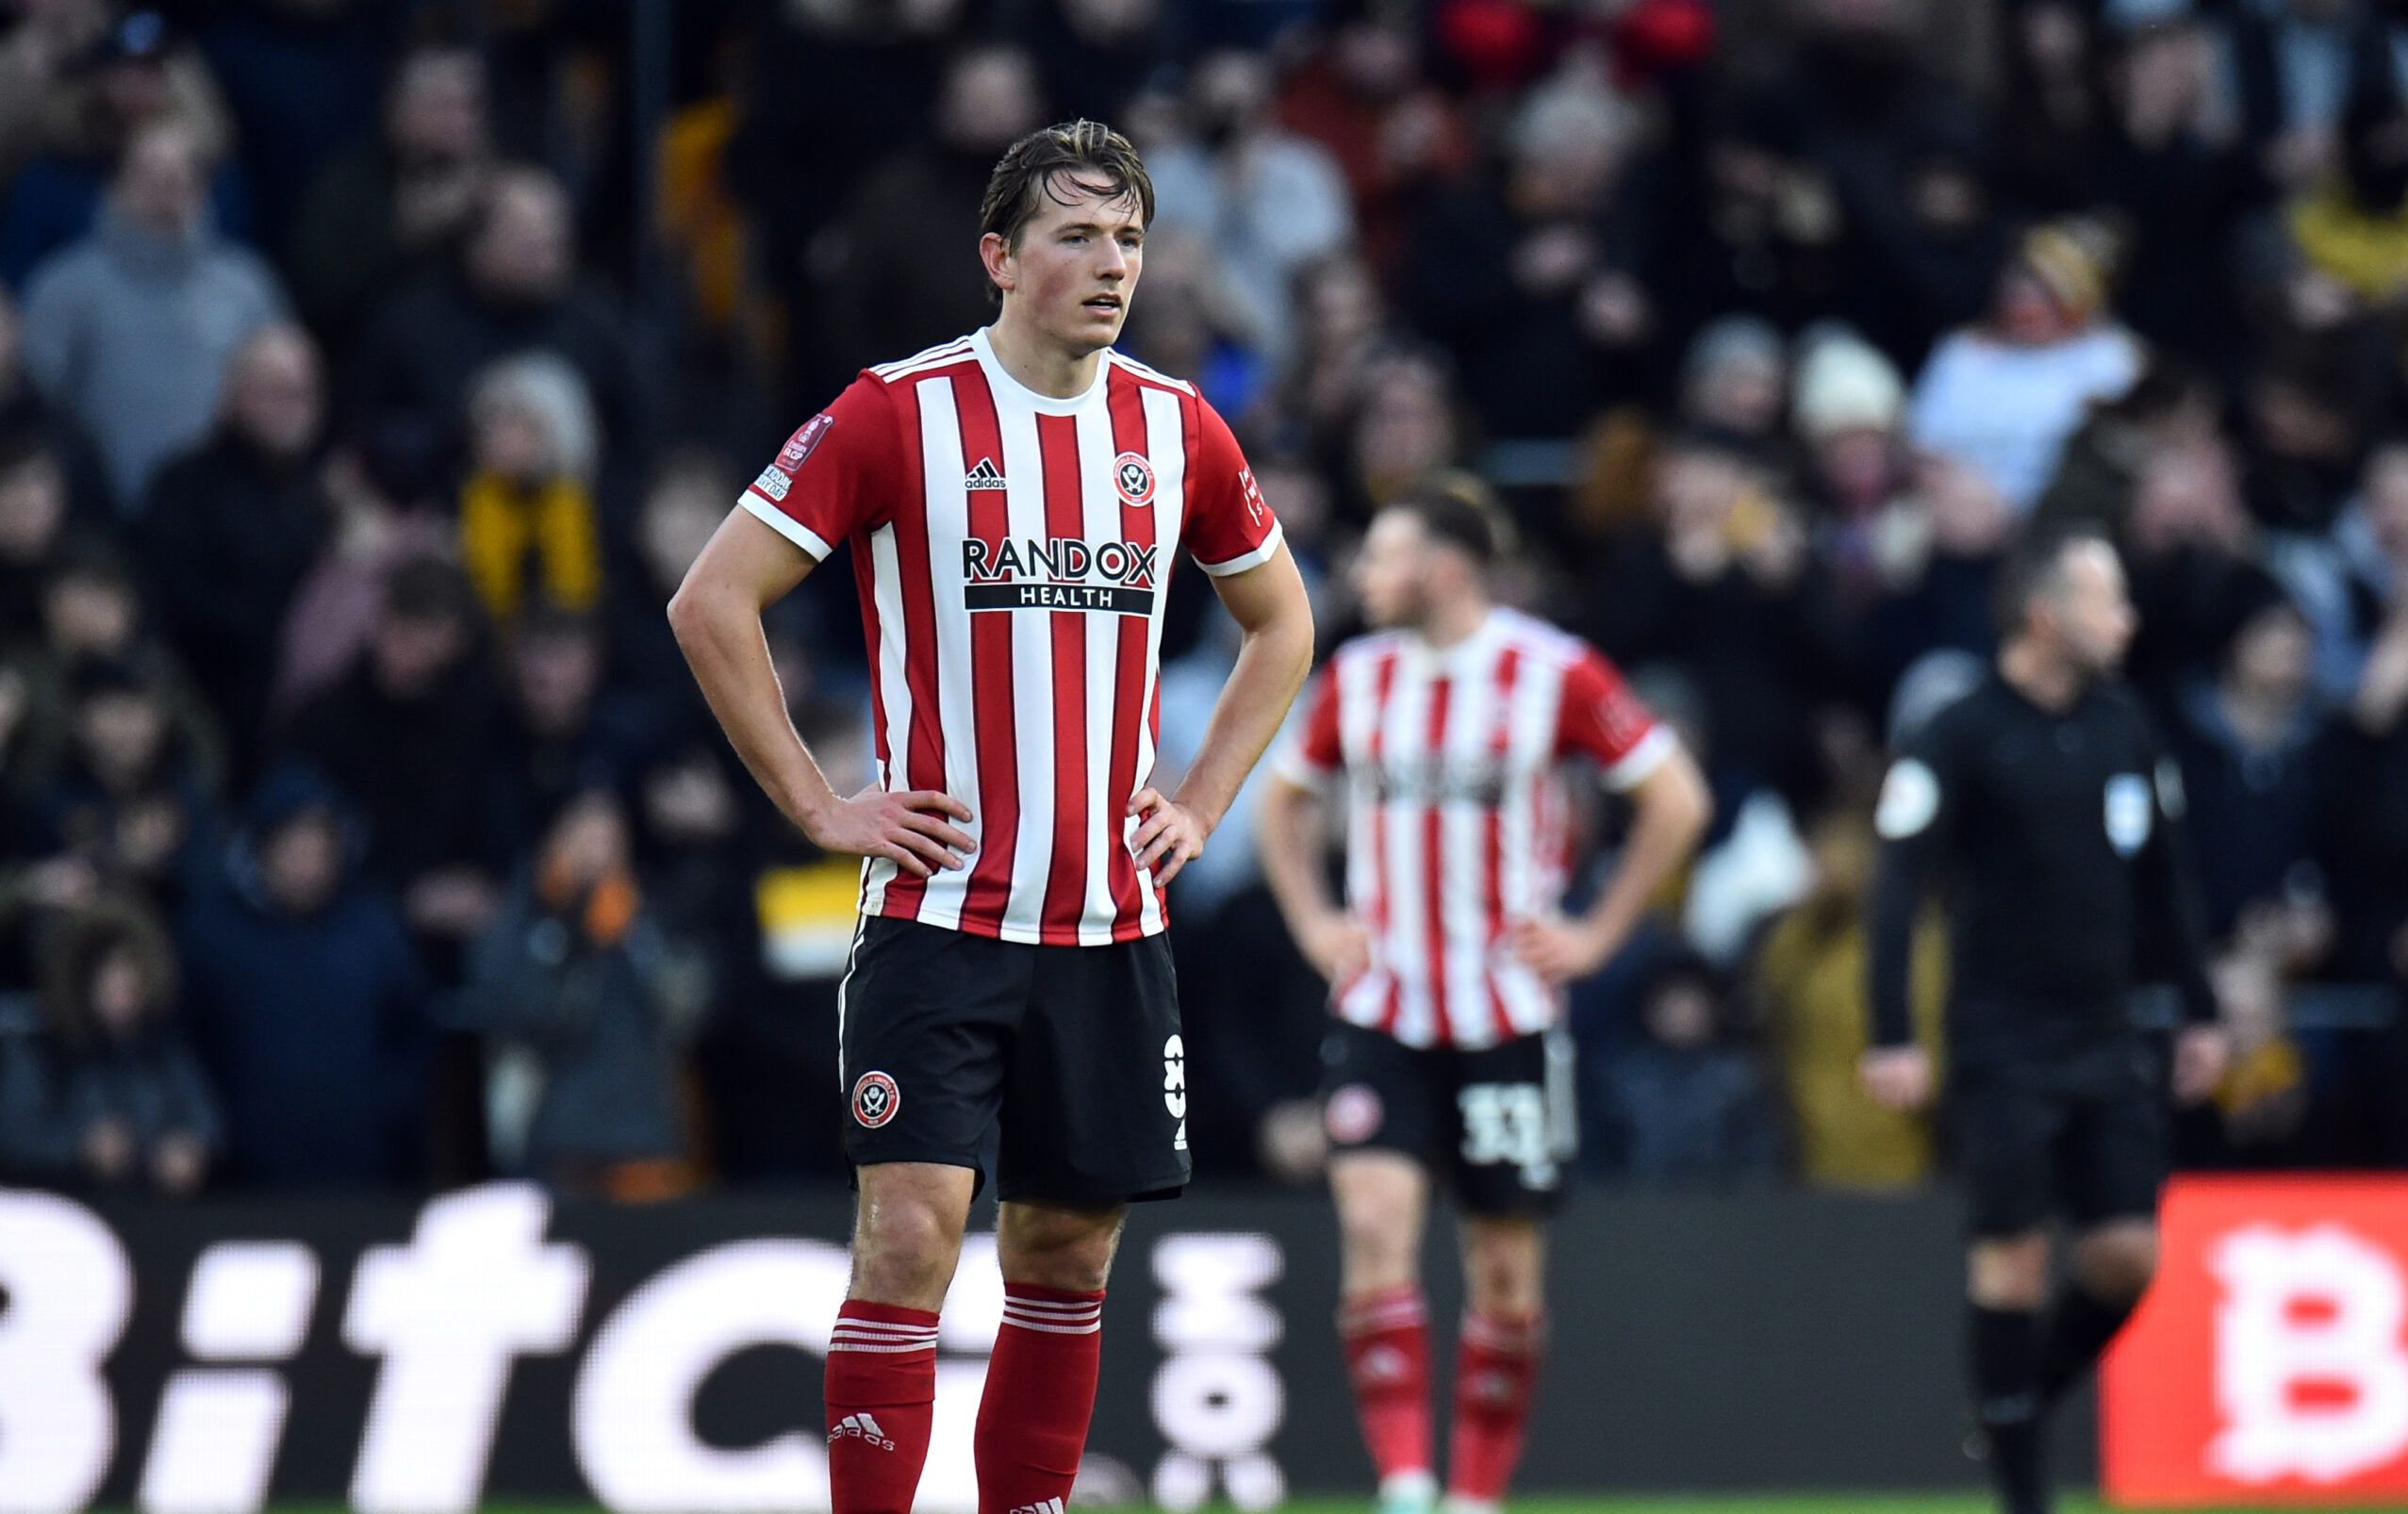 Soccer Football - FA Cup Third Round - Wolverhampton Wanderers v Sheffield United - Molineux Stadium, Wolverhampton, Britain - January 9, 2022 Sheffield United's Sander Berge looks dejected after Wolverhampton Wanderers' Nelson Semedo scores their second goal REUTERS/Peter Powell